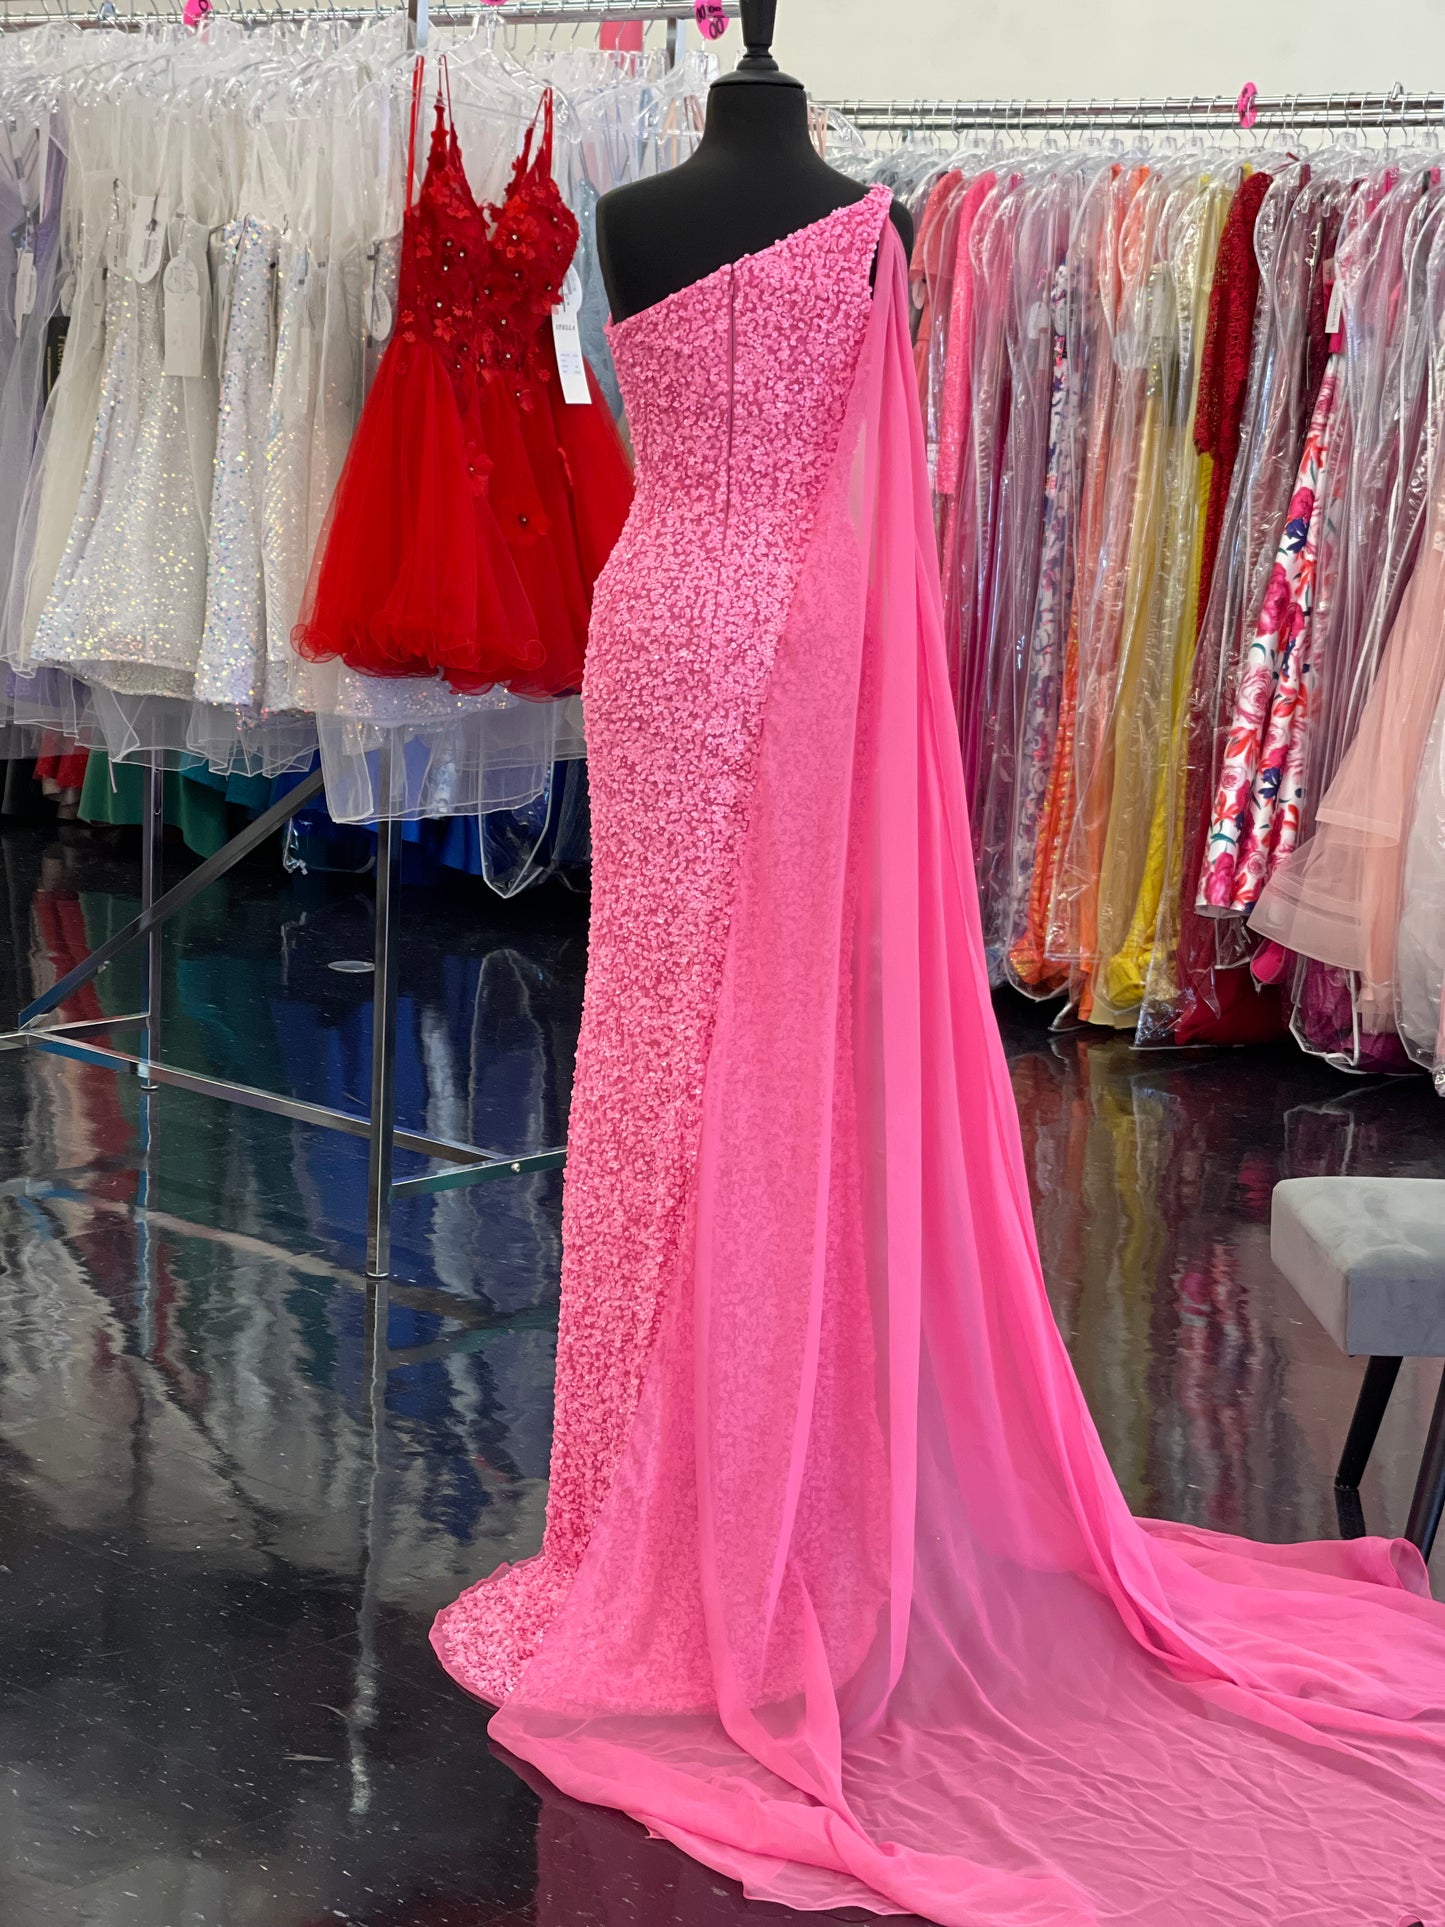 Ashley Lauren 11371 Size 4 Candy Pink One Shoulder Prom Dress fully sequence with shoulder cape